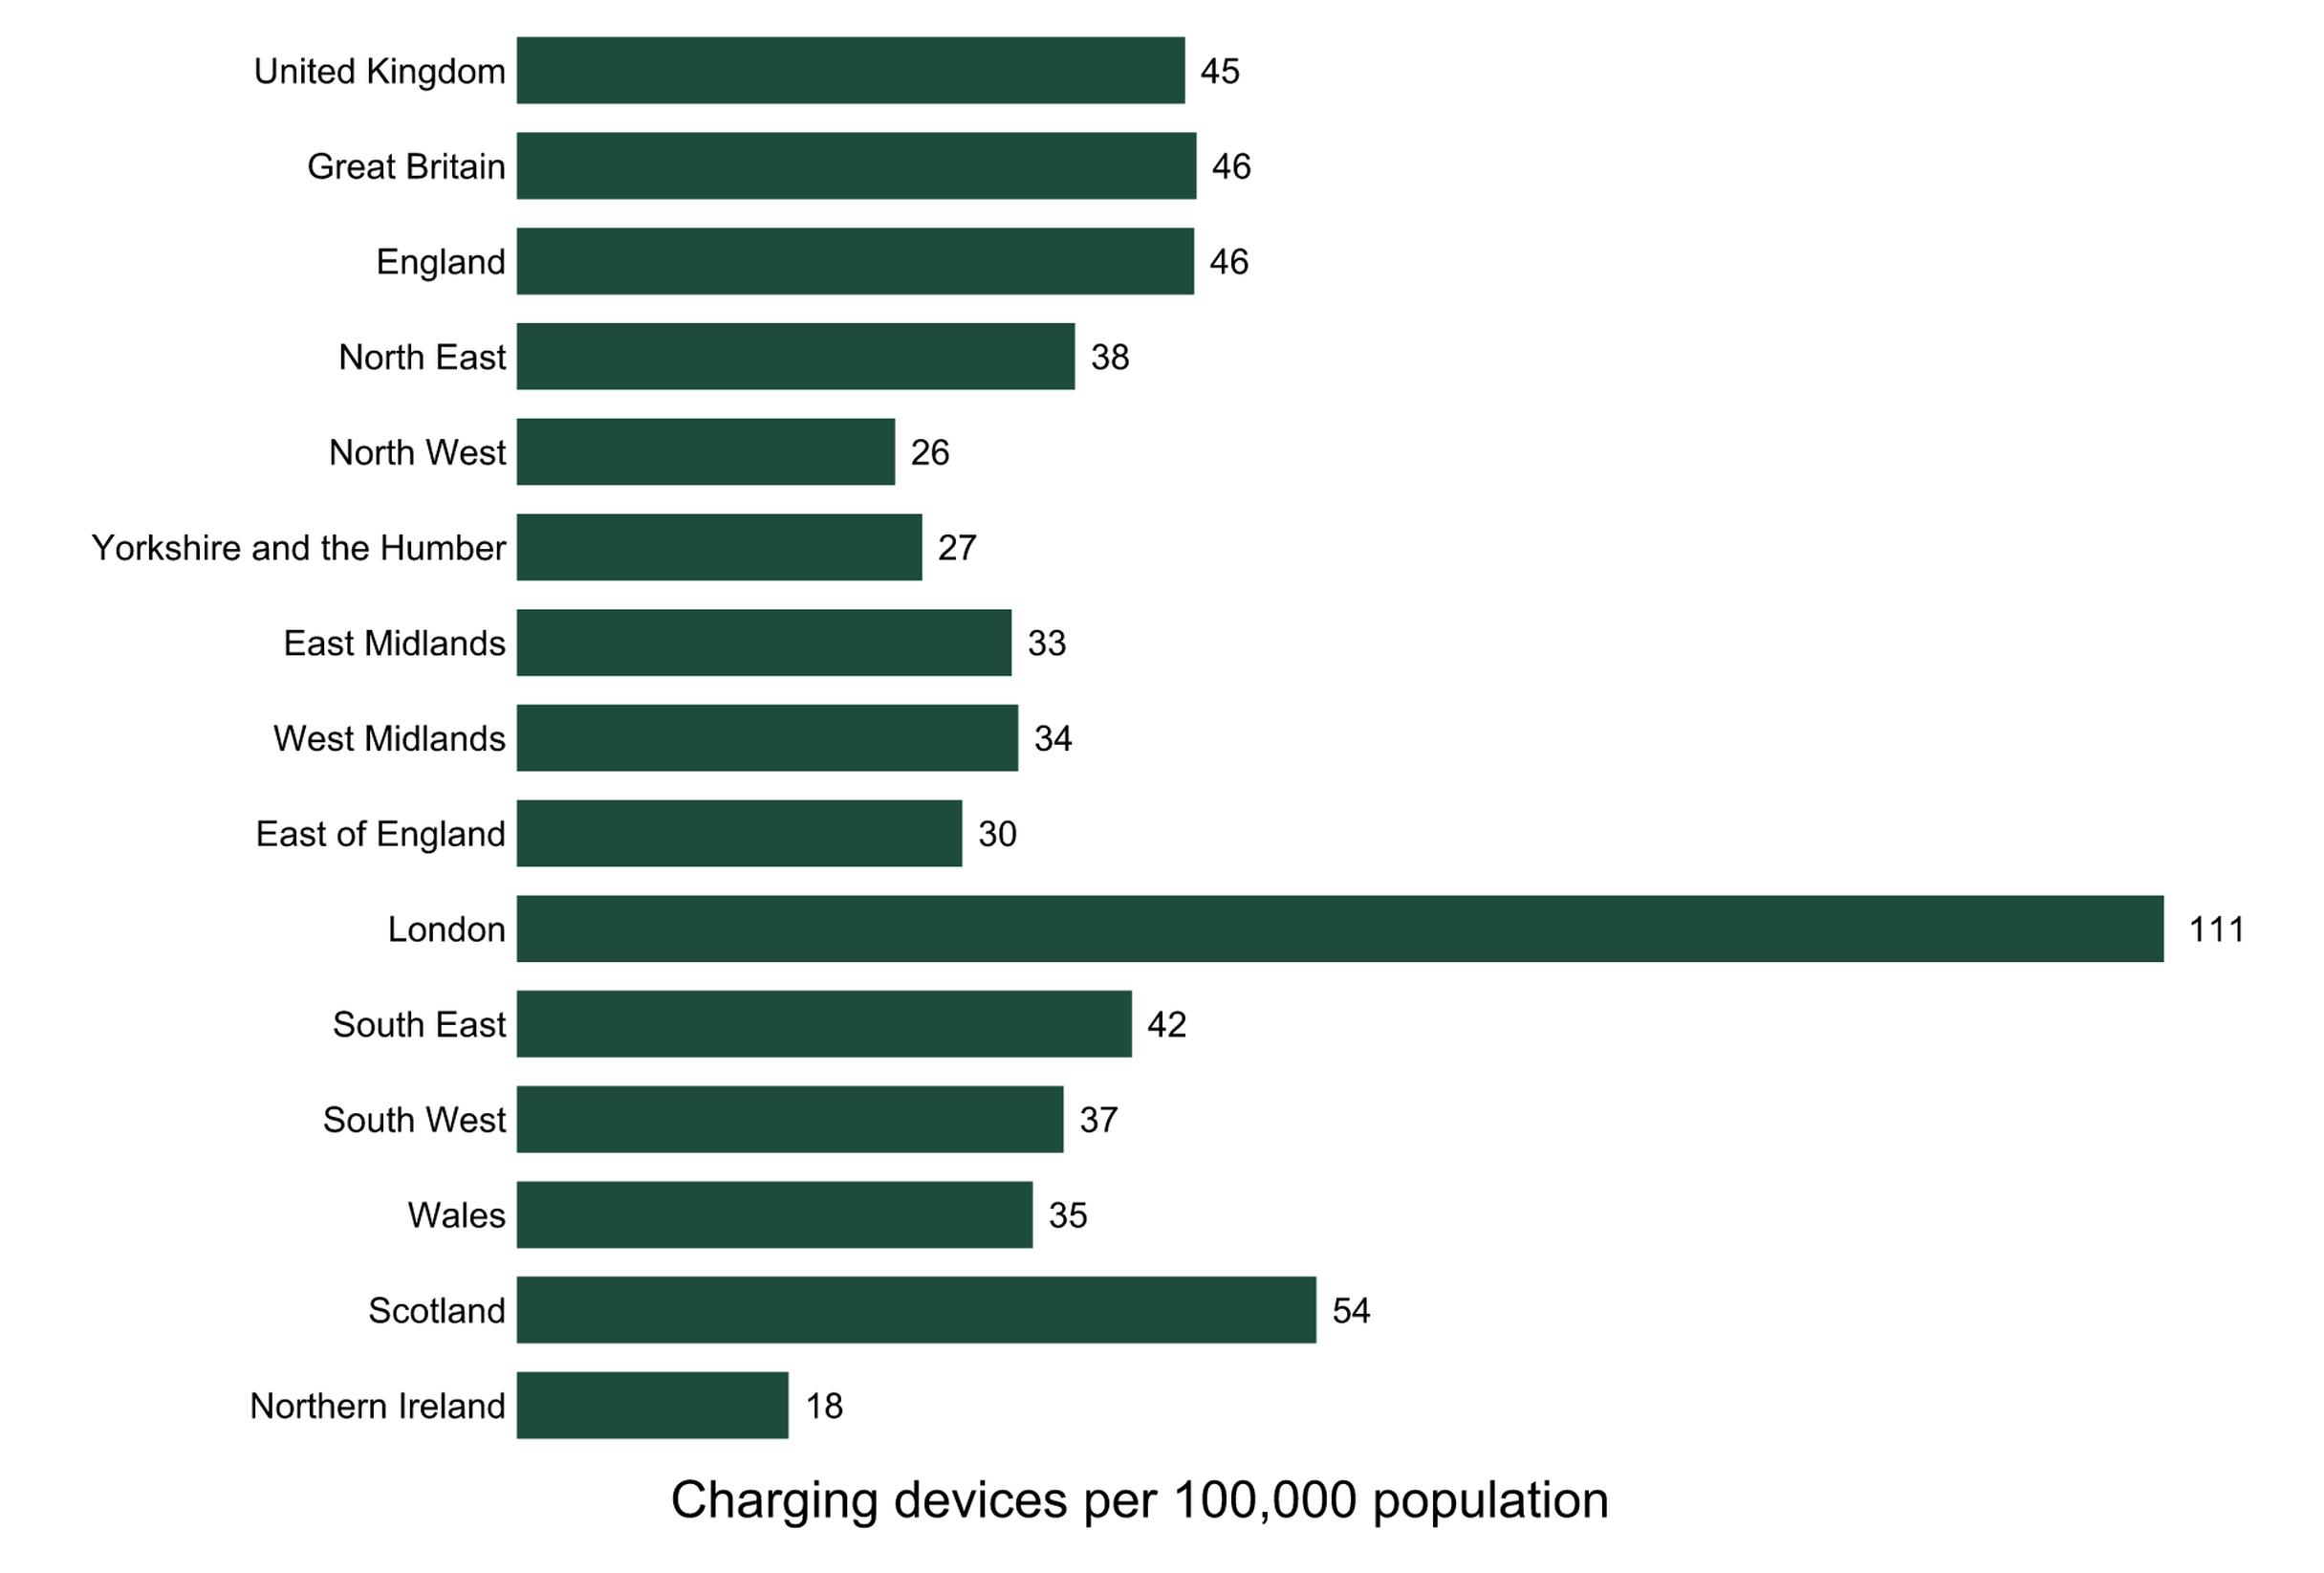 Public charging devices per 100,000 of population by UK country and
region: 1 April 2022 (DfT)